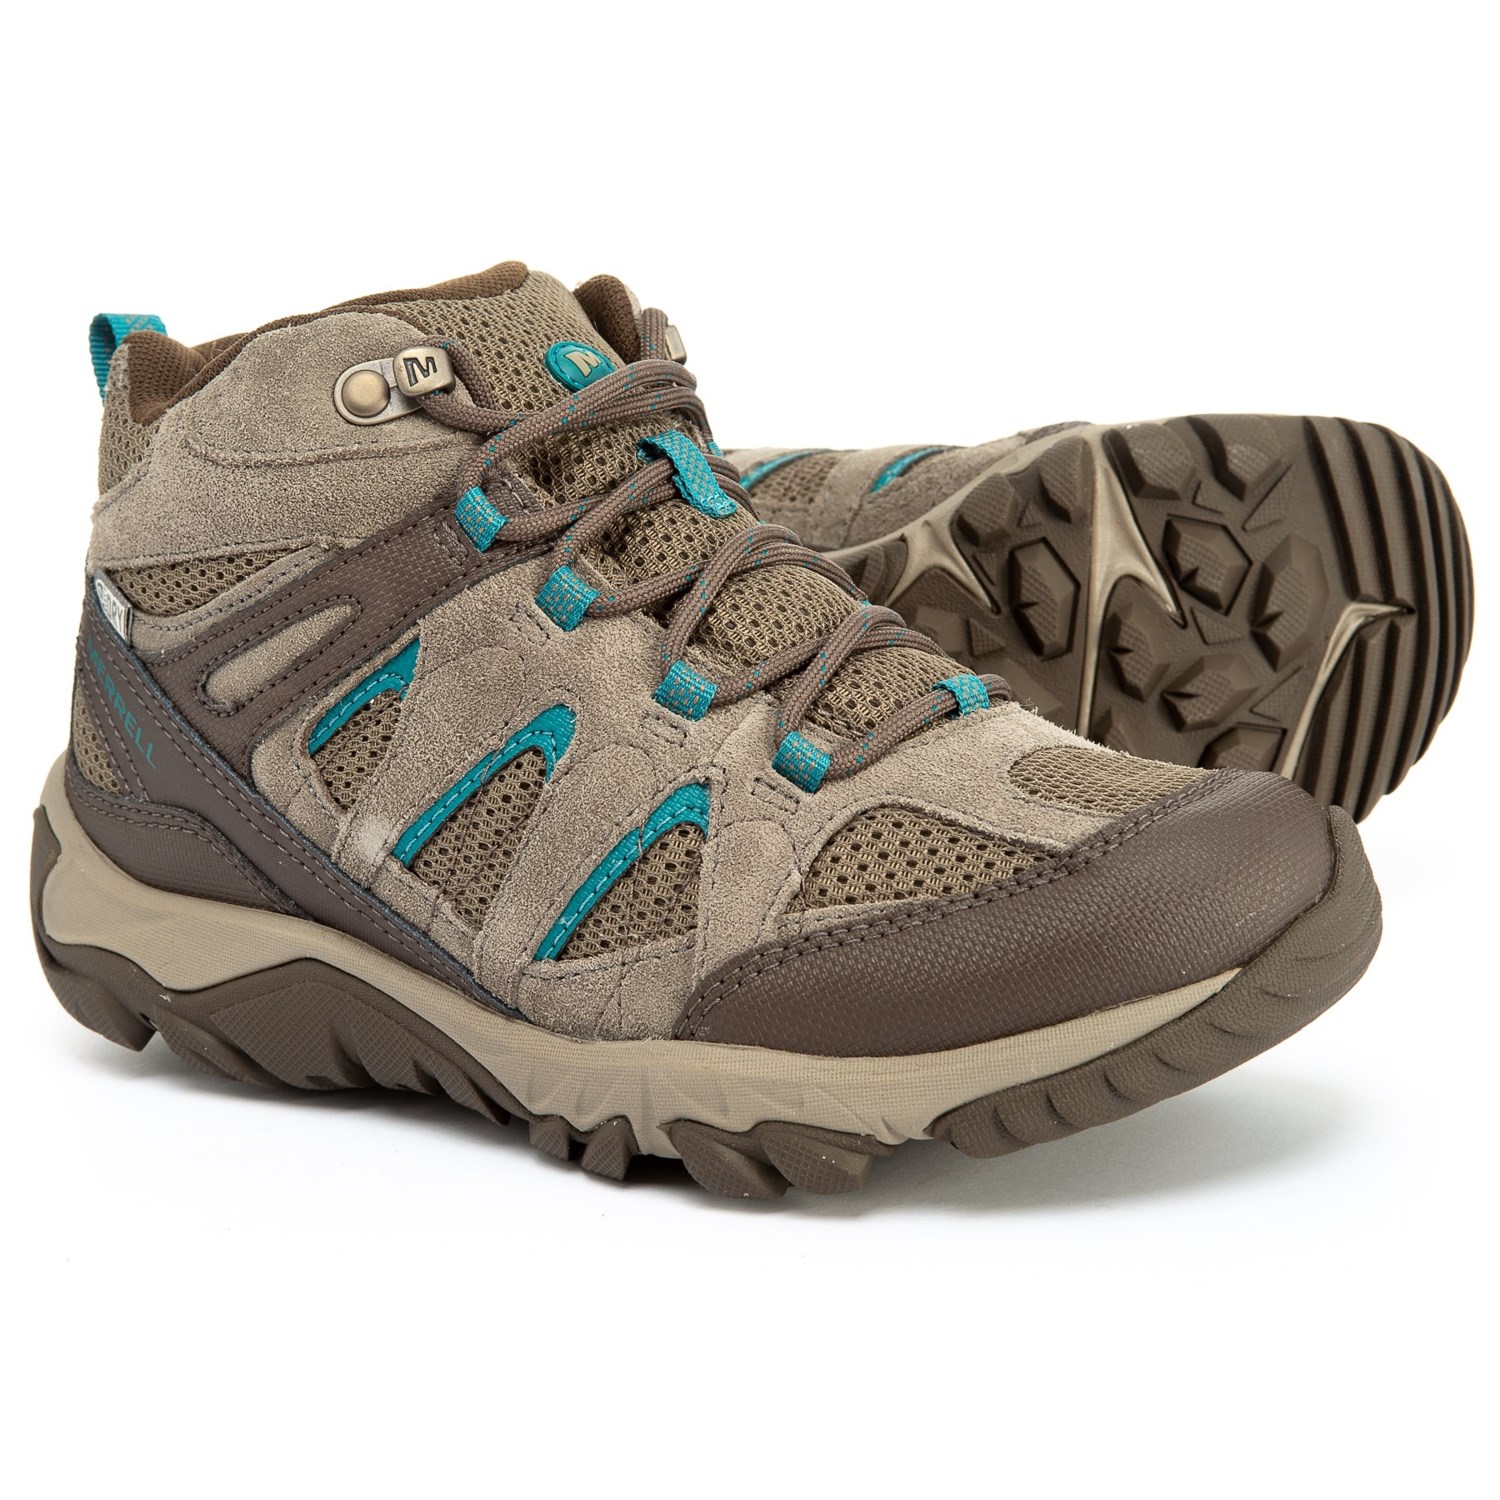 Merrell Outmost Vent Mid Hiking Boots – Waterproof (For Women)